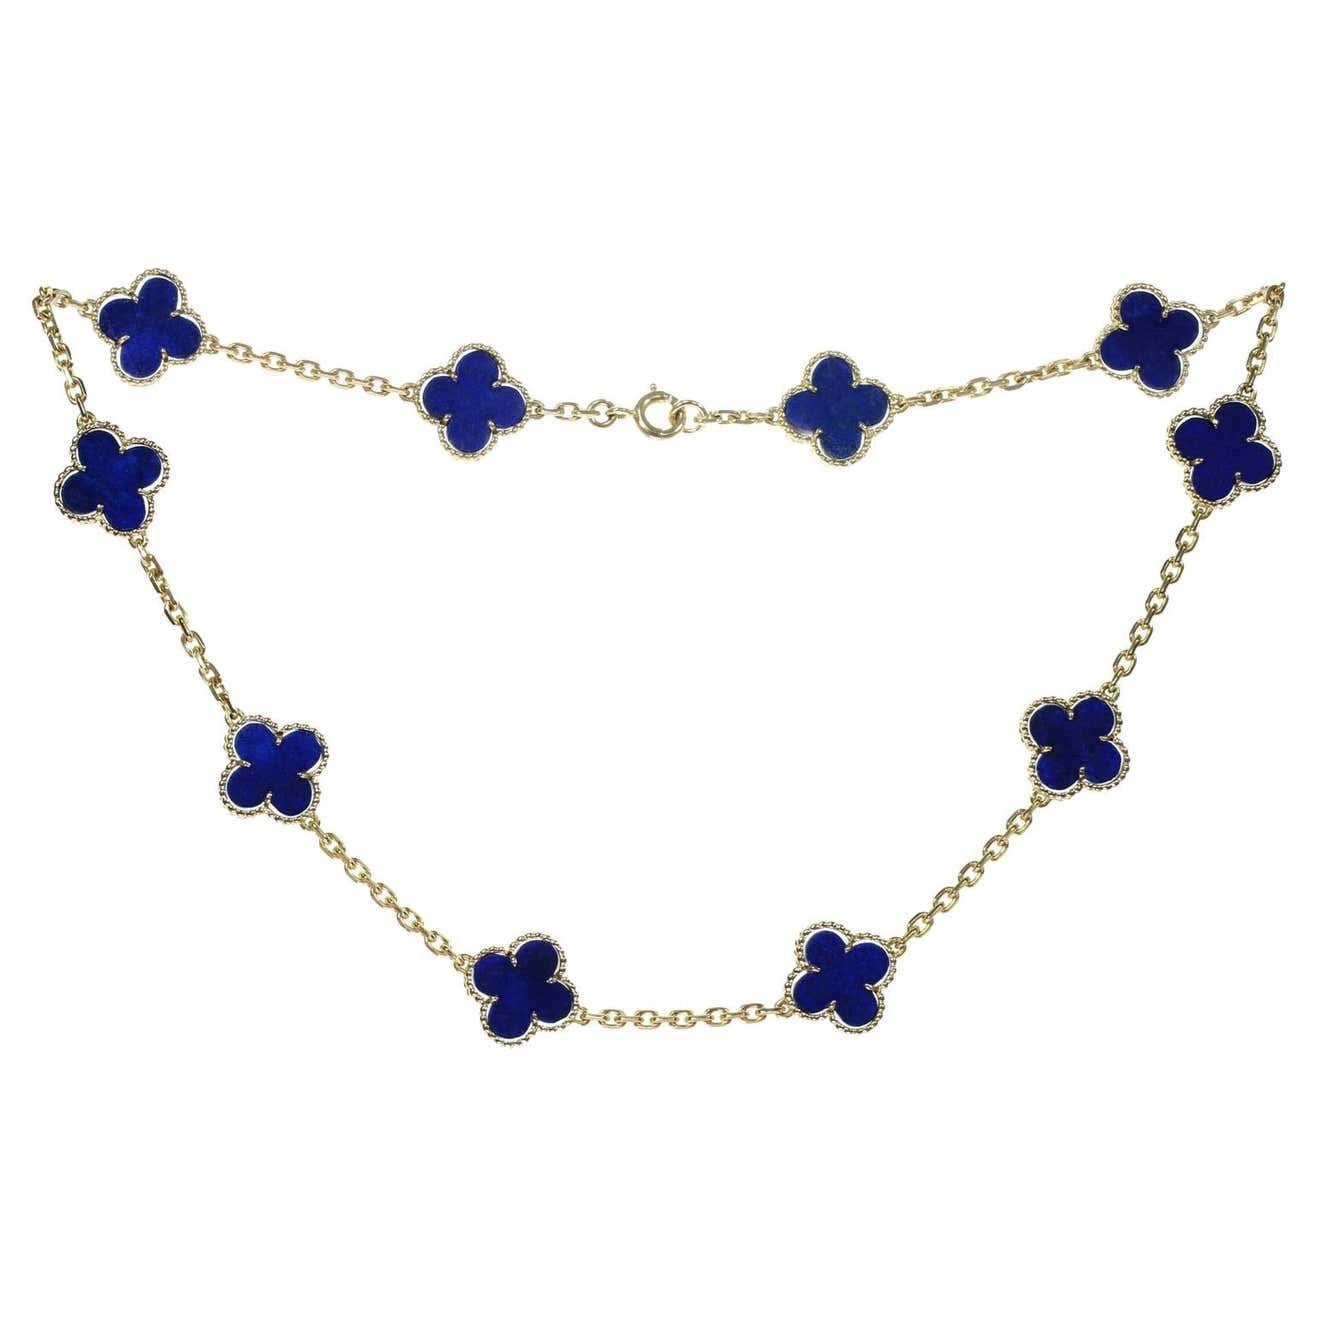 This classic vintage Van Cleef & Arpels necklace is crafted in 18k yellow gold and features 10 lucky clover motifs inlaid with lapis lazuli in round bead settings. Made in France circa 2000. Measurements: 0.59